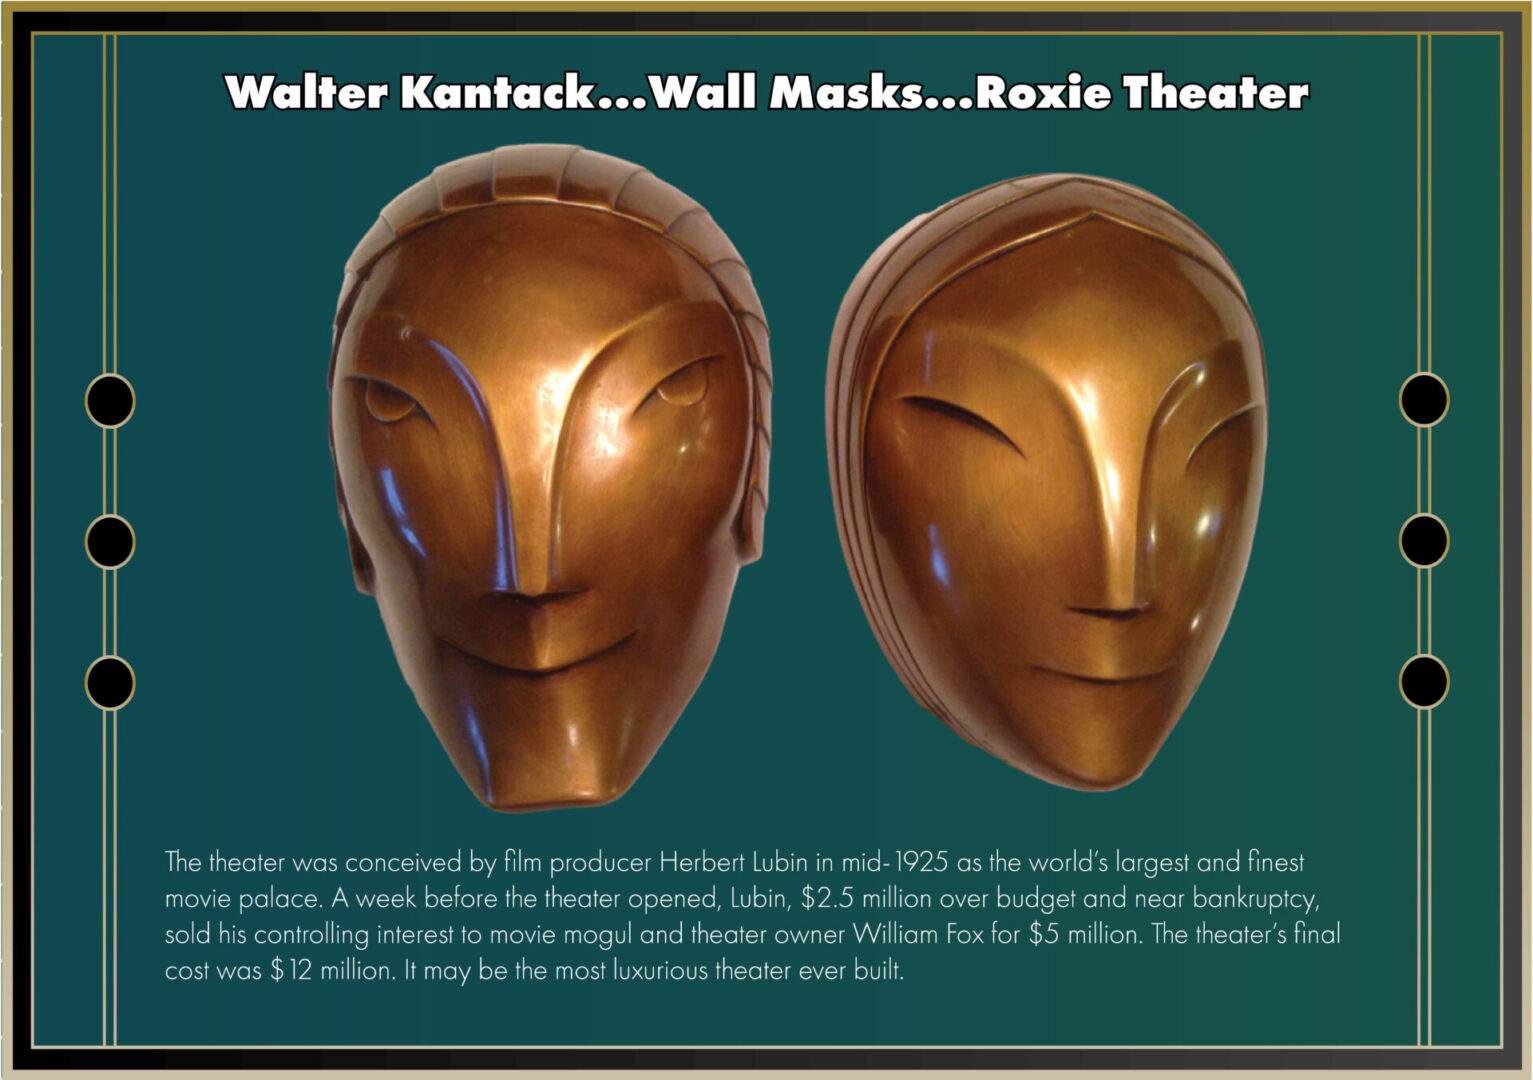 Walter Kantack designed Wall Masks for Roxie Theater